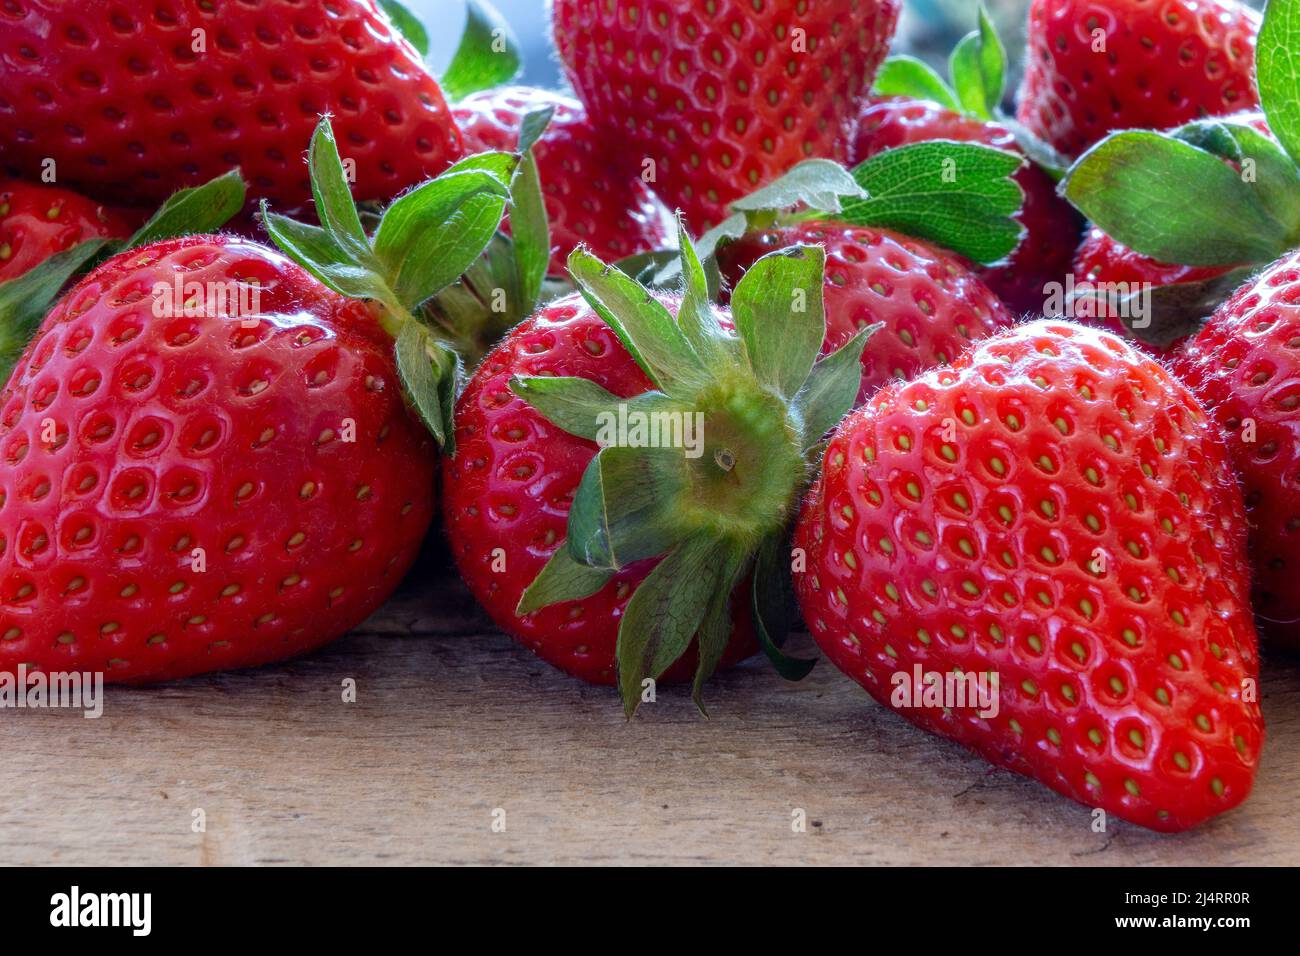 Fresh strawberries over old wooden table Stock Photo